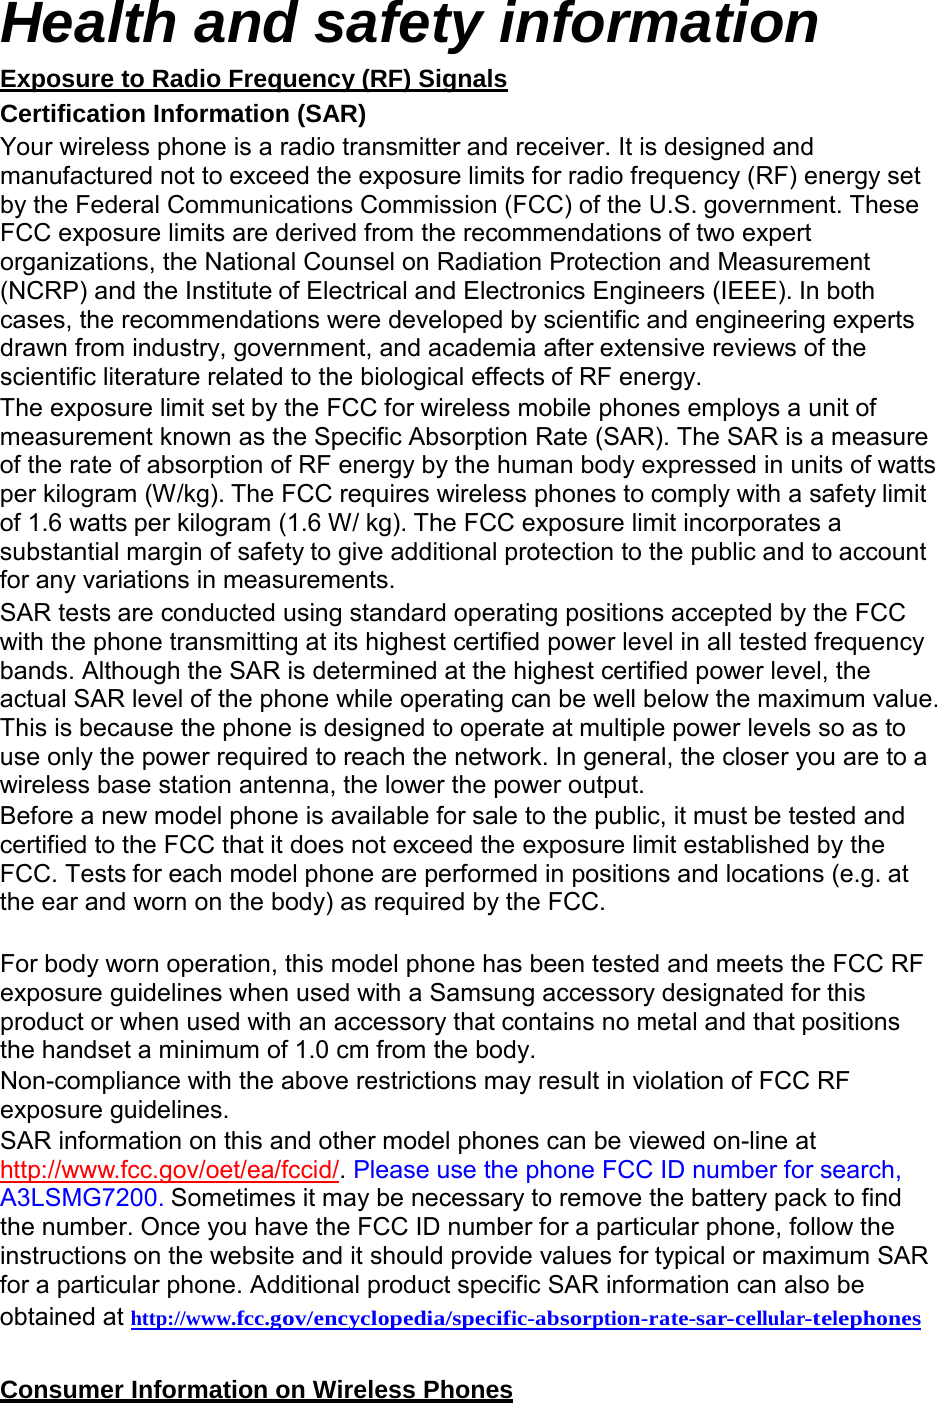  Health and safety information Exposure to Radio Frequency (RF) Signals Certification Information (SAR) Your wireless phone is a radio transmitter and receiver. It is designed and manufactured not to exceed the exposure limits for radio frequency (RF) energy set by the Federal Communications Commission (FCC) of the U.S. government. These FCC exposure limits are derived from the recommendations of two expert organizations, the National Counsel on Radiation Protection and Measurement (NCRP) and the Institute of Electrical and Electronics Engineers (IEEE). In both cases, the recommendations were developed by scientific and engineering experts drawn from industry, government, and academia after extensive reviews of the scientific literature related to the biological effects of RF energy. The exposure limit set by the FCC for wireless mobile phones employs a unit of measurement known as the Specific Absorption Rate (SAR). The SAR is a measure of the rate of absorption of RF energy by the human body expressed in units of watts per kilogram (W/kg). The FCC requires wireless phones to comply with a safety limit of 1.6 watts per kilogram (1.6 W/ kg). The FCC exposure limit incorporates a substantial margin of safety to give additional protection to the public and to account for any variations in measurements. SAR tests are conducted using standard operating positions accepted by the FCC with the phone transmitting at its highest certified power level in all tested frequency bands. Although the SAR is determined at the highest certified power level, the actual SAR level of the phone while operating can be well below the maximum value. This is because the phone is designed to operate at multiple power levels so as to use only the power required to reach the network. In general, the closer you are to a wireless base station antenna, the lower the power output. Before a new model phone is available for sale to the public, it must be tested and certified to the FCC that it does not exceed the exposure limit established by the FCC. Tests for each model phone are performed in positions and locations (e.g. at the ear and worn on the body) as required by the FCC.   For body worn operation, this model phone has been tested and meets the FCC RF exposure guidelines when used with a Samsung accessory designated for this product or when used with an accessory that contains no metal and that positions the handset a minimum of 1.0 cm from the body. Non-compliance with the above restrictions may result in violation of FCC RF exposure guidelines. SAR information on this and other model phones can be viewed on-line at http://www.fcc.gov/oet/ea/fccid/. Please use the phone FCC ID number for search, A3LSMG7200. Sometimes it may be necessary to remove the battery pack to find the number. Once you have the FCC ID number for a particular phone, follow the instructions on the website and it should provide values for typical or maximum SAR for a particular phone. Additional product specific SAR information can also be obtained at  http://www.fcc.gov/encyclopedia/specific-absorption-rate-sar-cellular-telephones   Consumer Information on Wireless Phones 